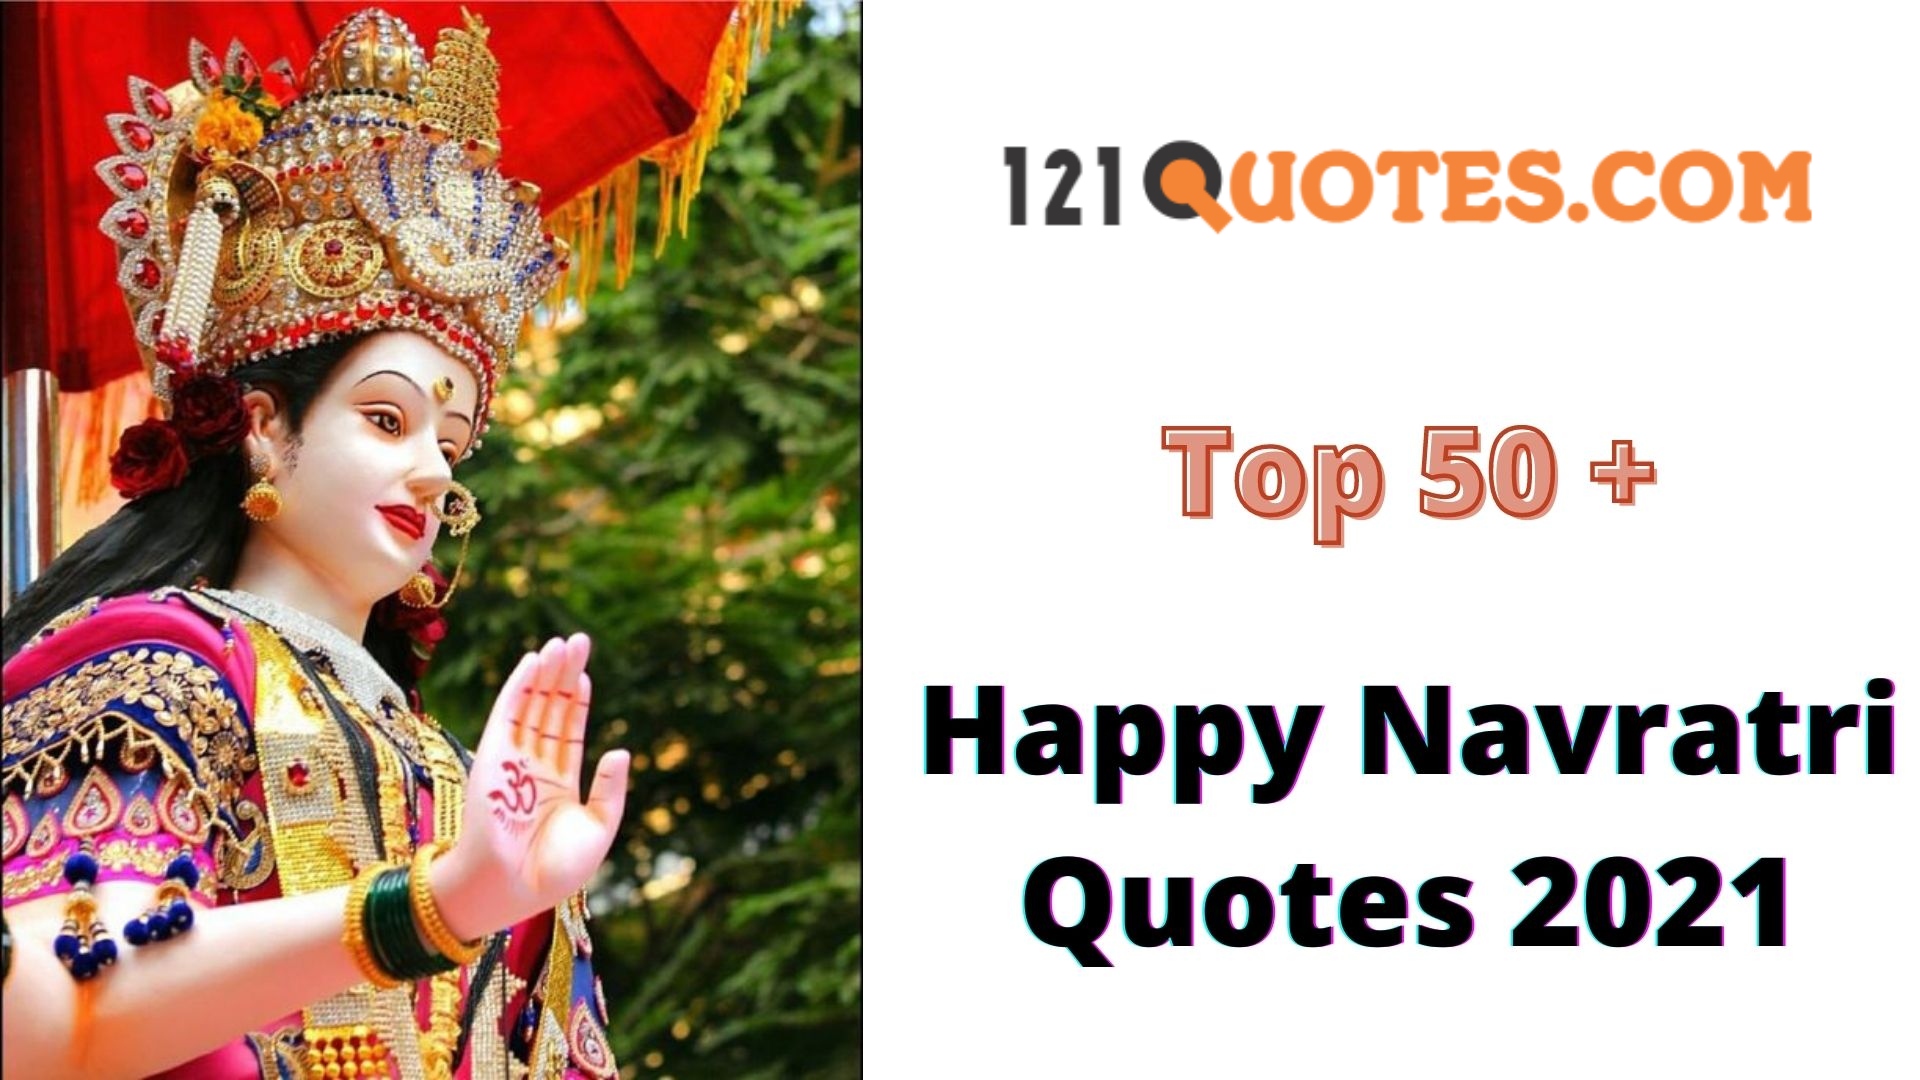 Top 50+ Happy Navratri Quotes 2021 - Images, Wishes, Quotes